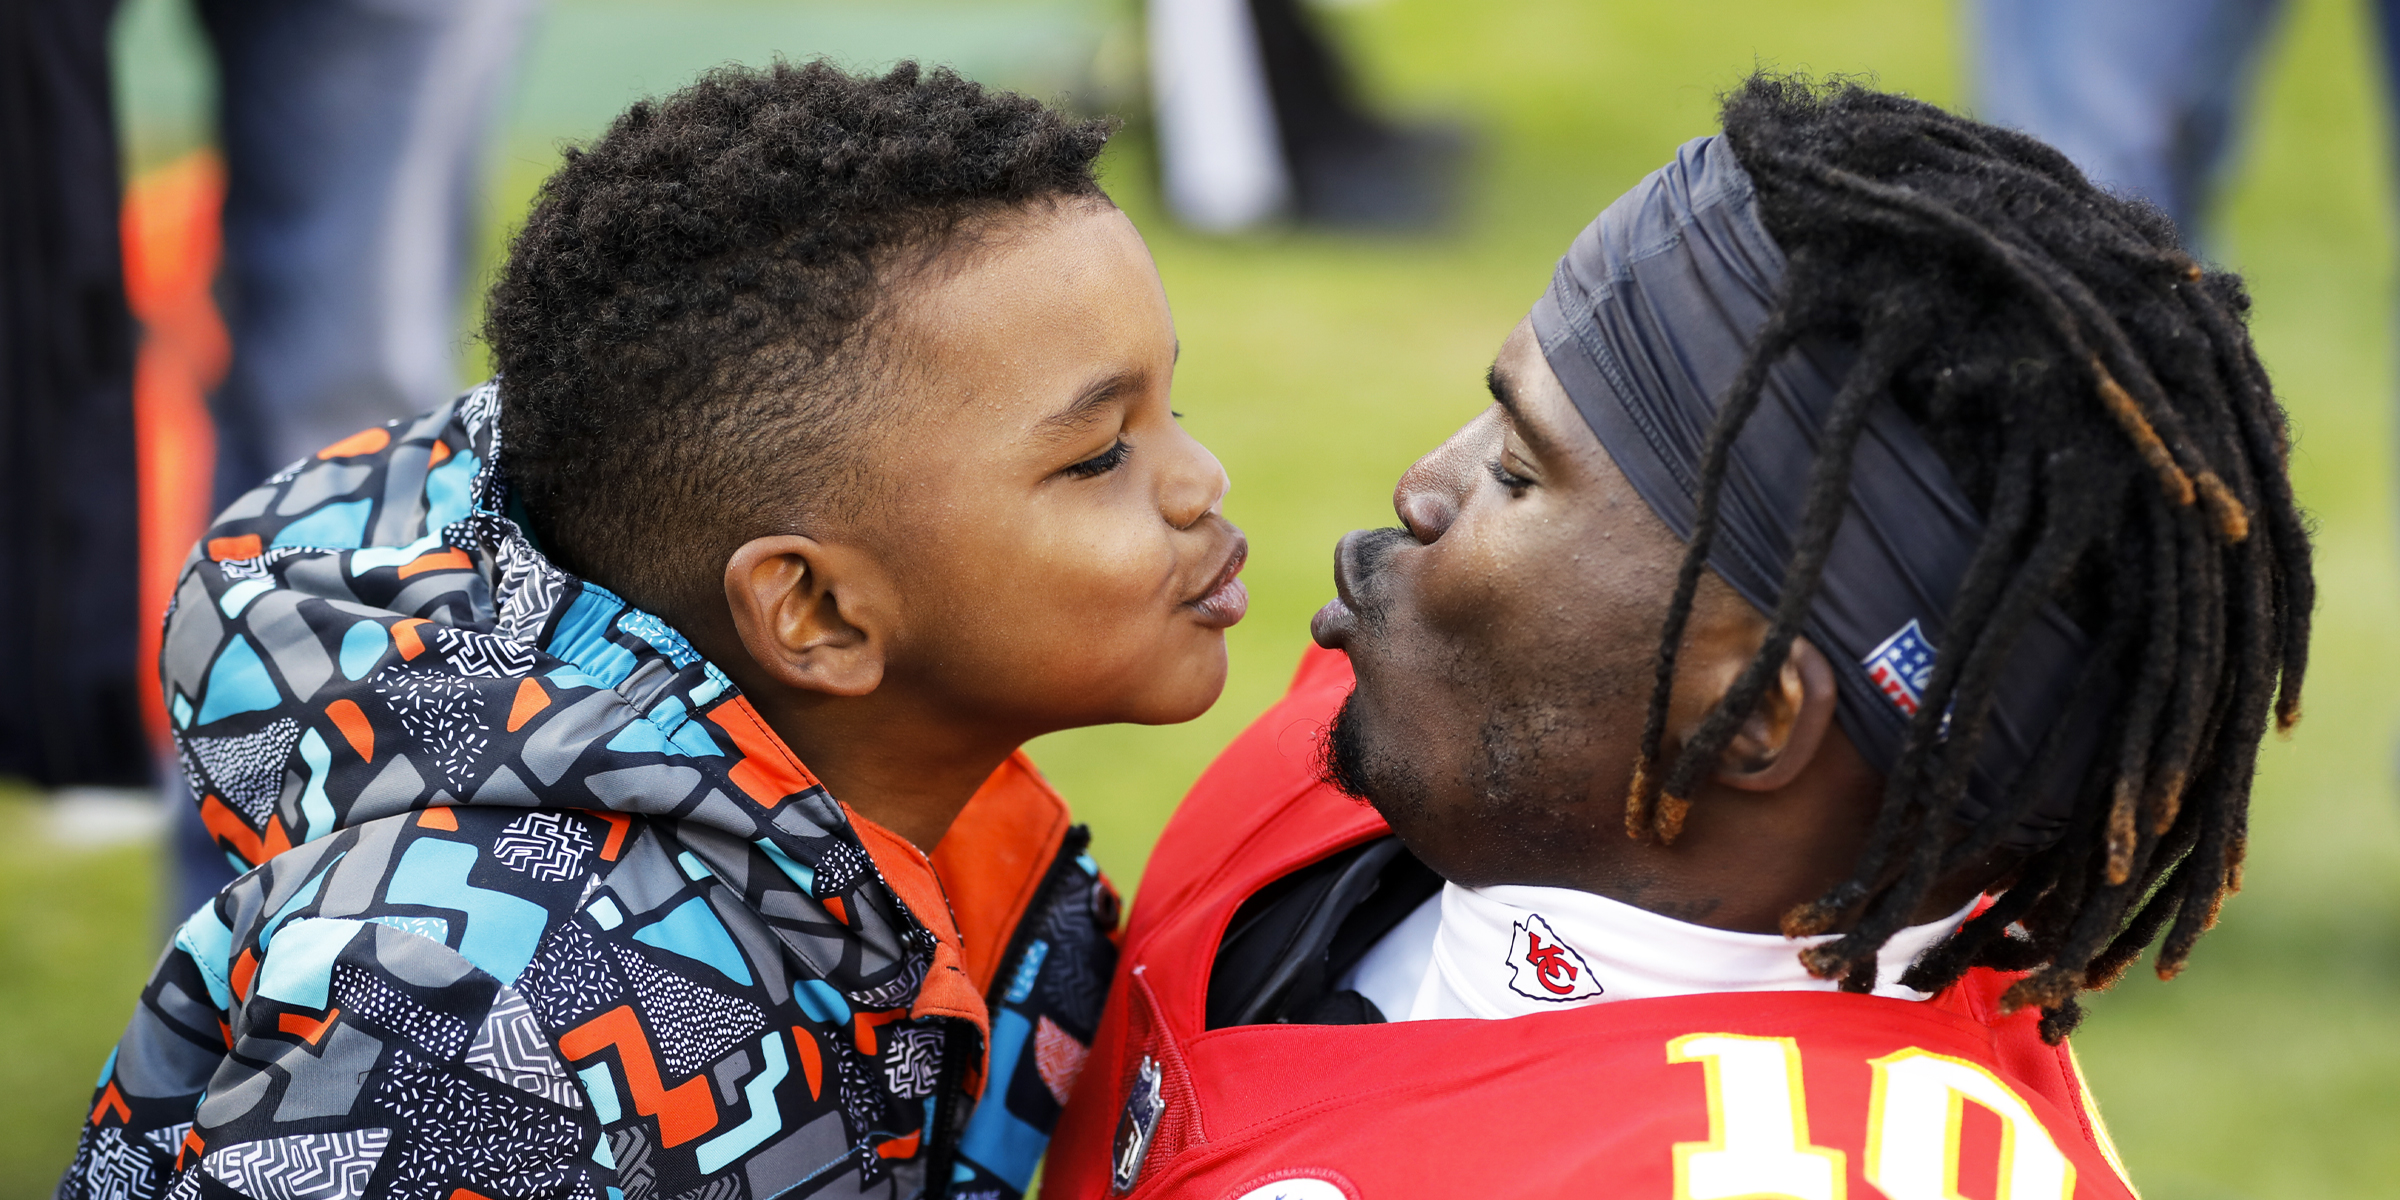 Zev and Tyreek Hill. | Source: Getty Images